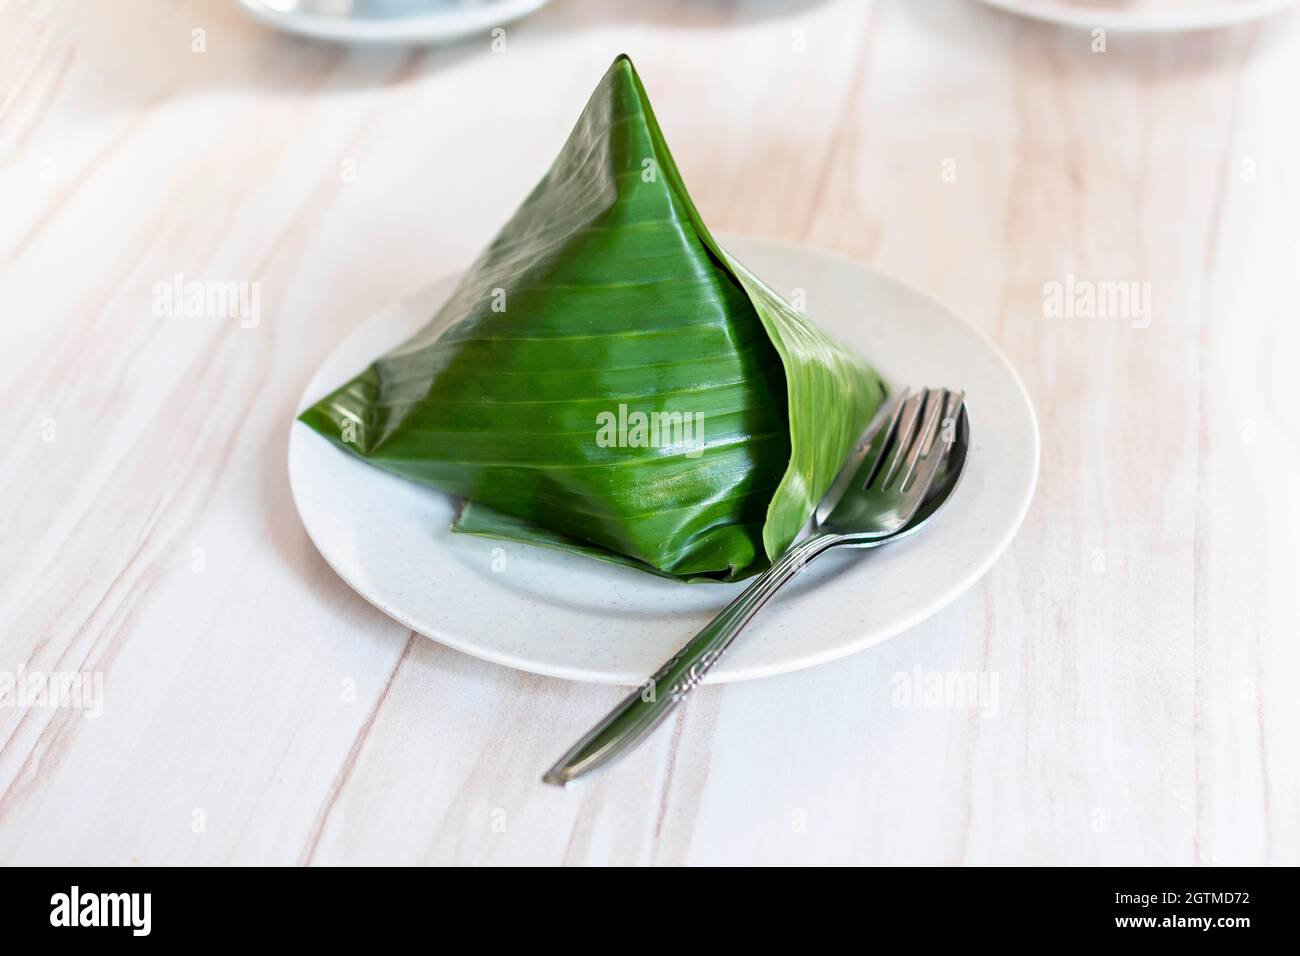 High Angle View Of Nasi Lemak In Plate On Table Stock Photo